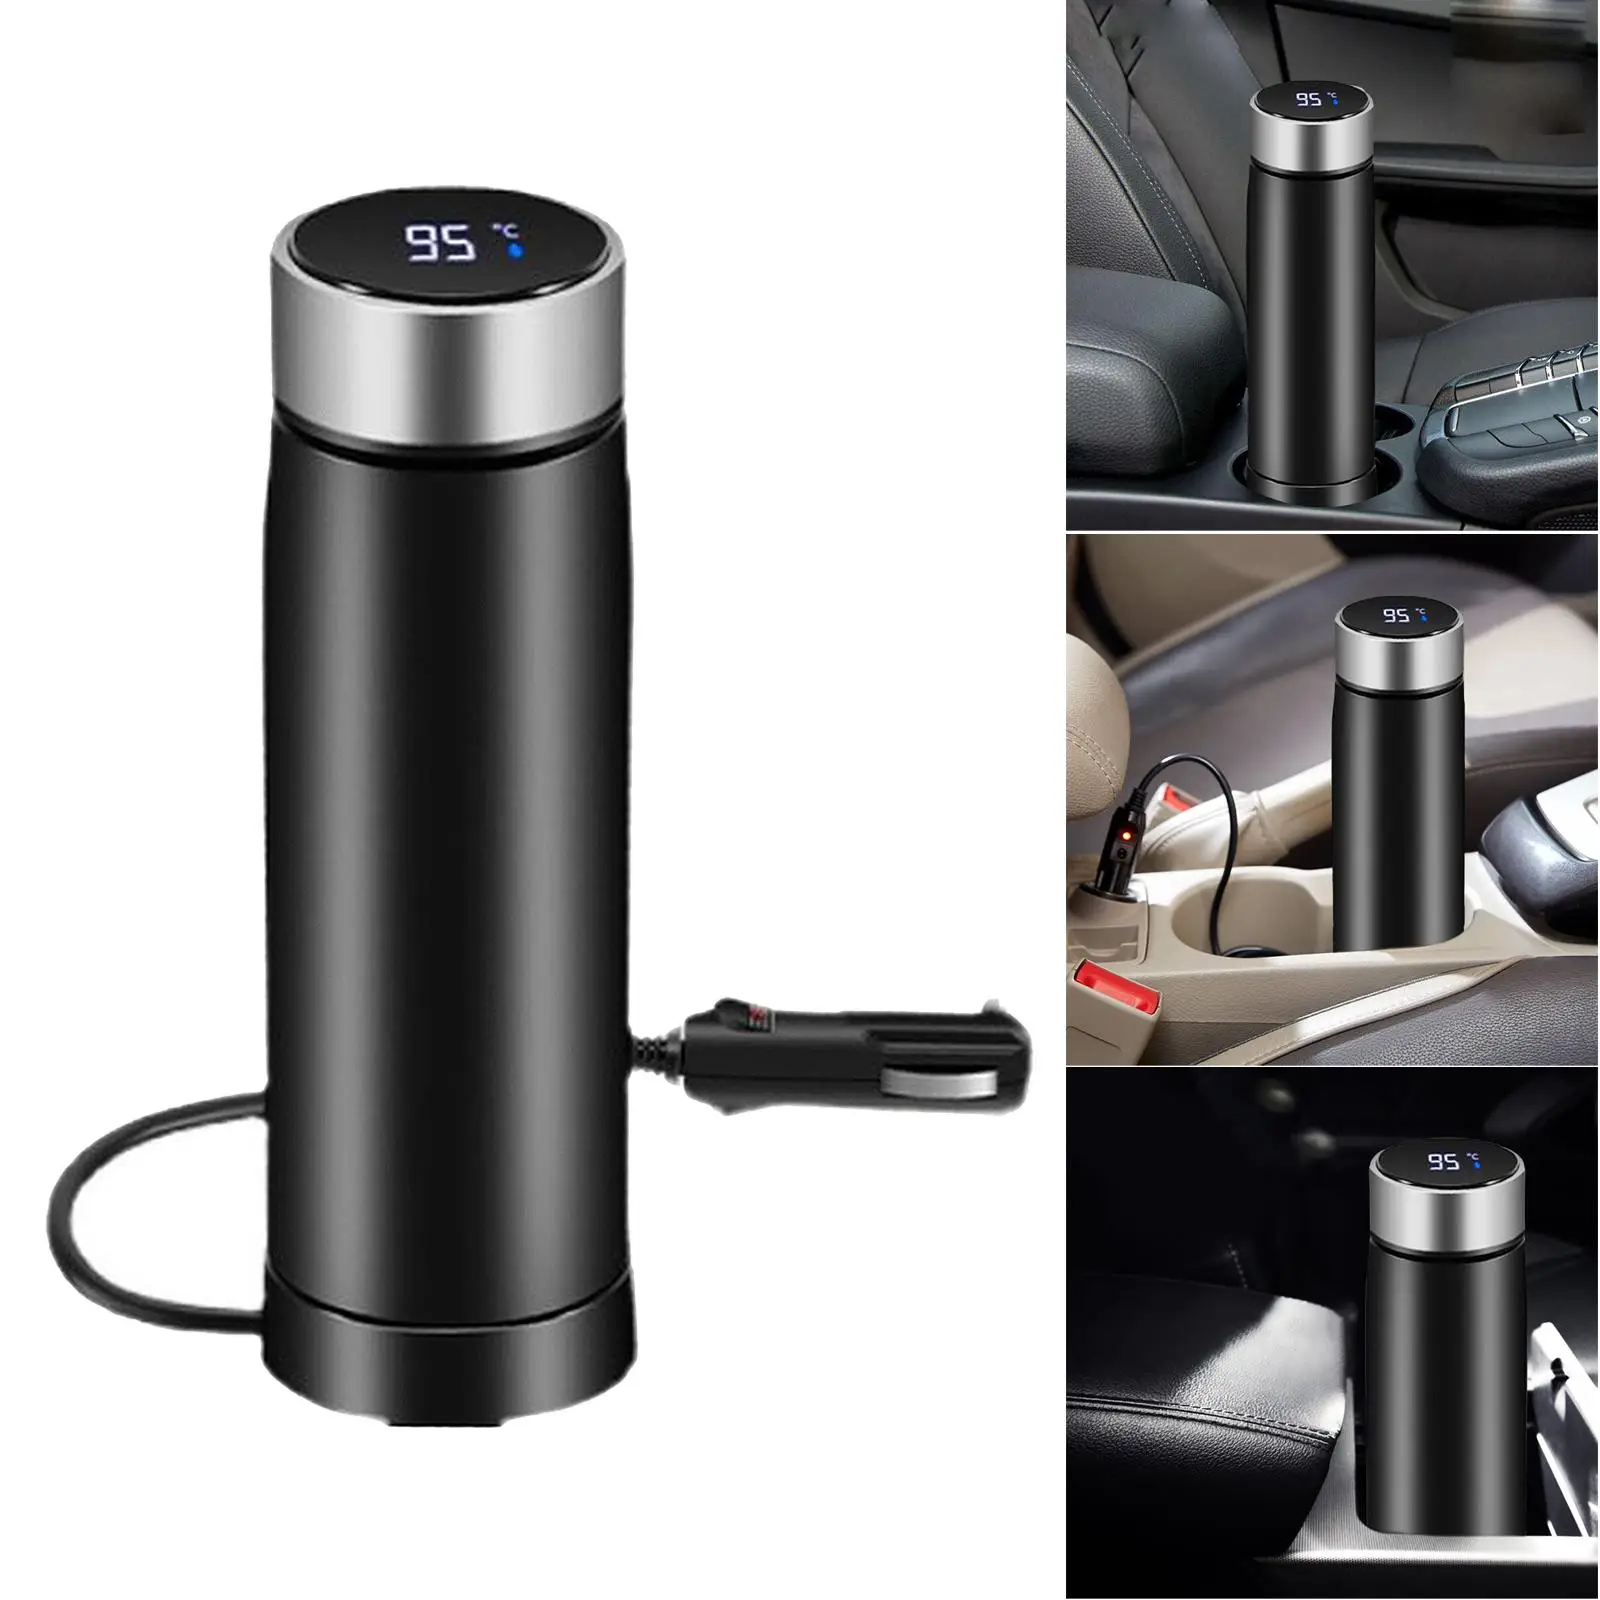 12 Heating Cup Insulated Cup Heater Car Bottle Warmer for Keep Warm Travel